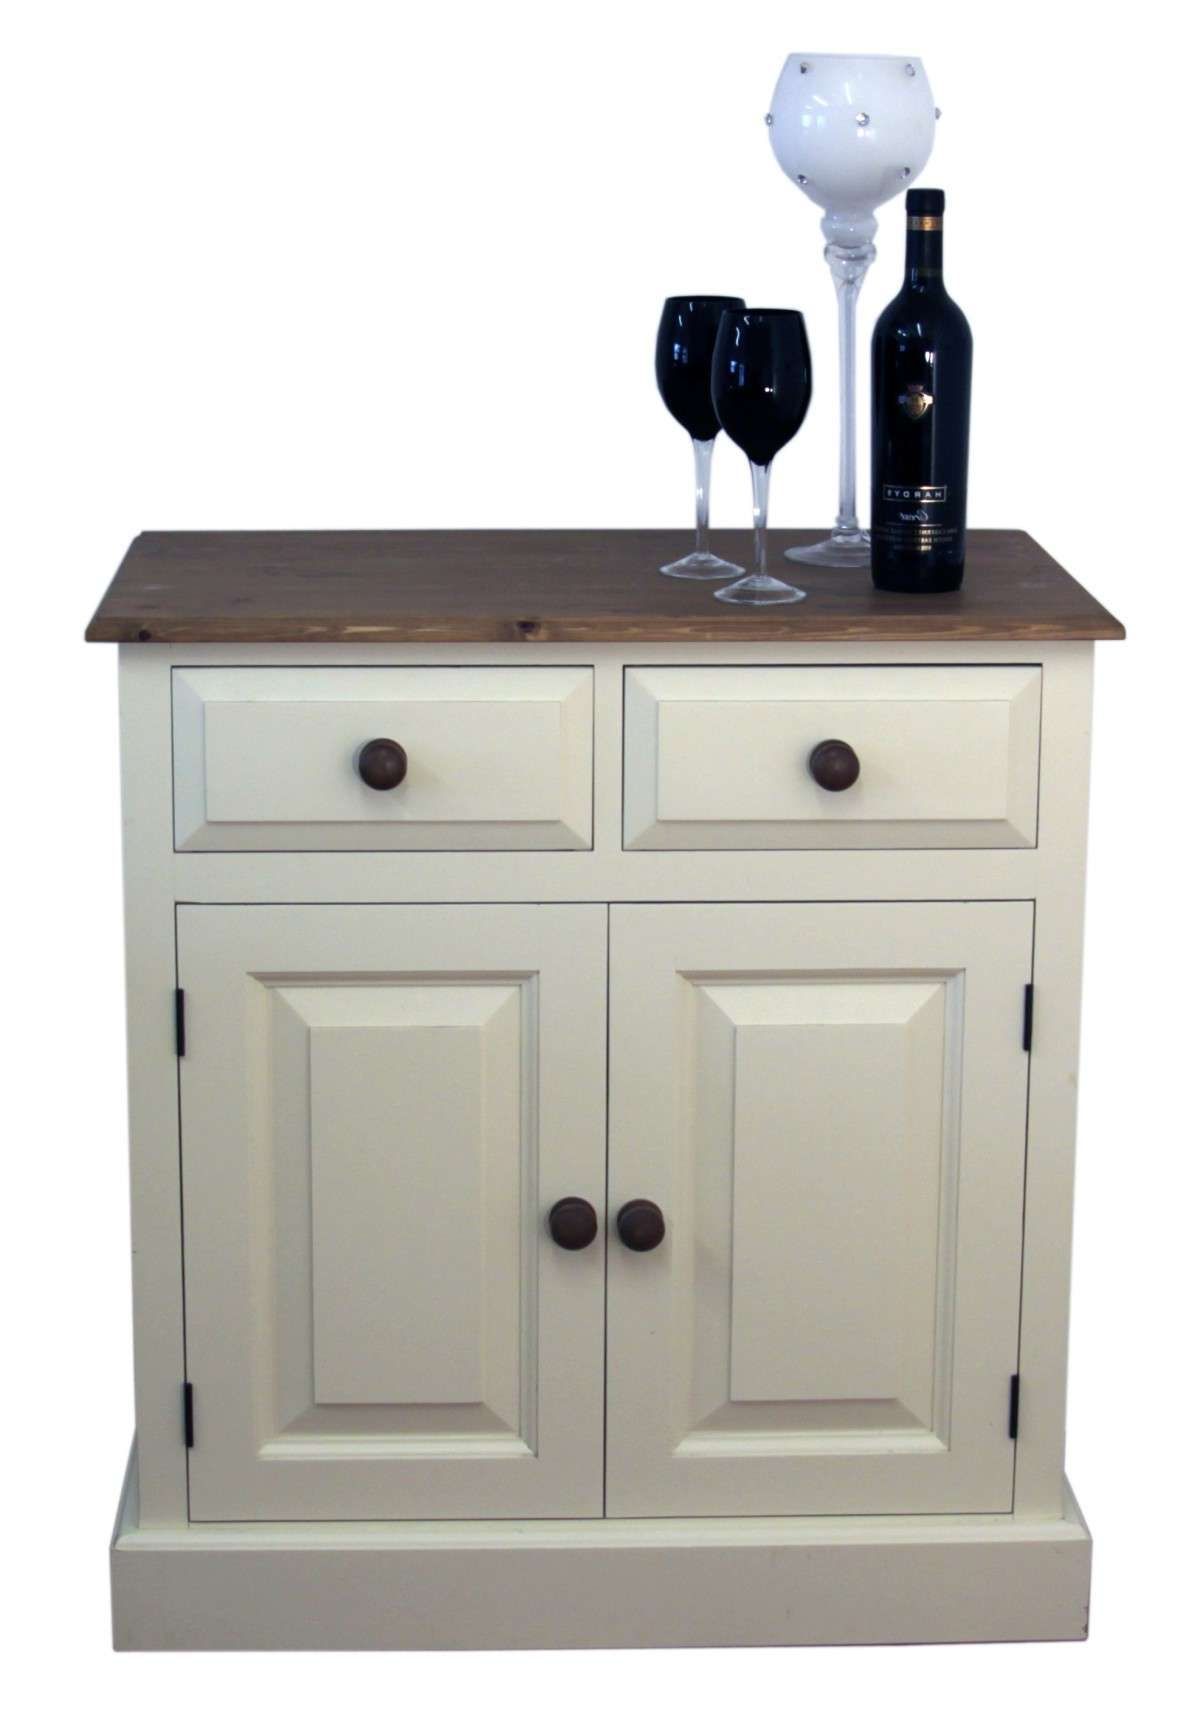 Doors And Drawers Shallow Depth Sideboard – Available In 2'6", 3 In Shallow Sideboards (View 5 of 20)